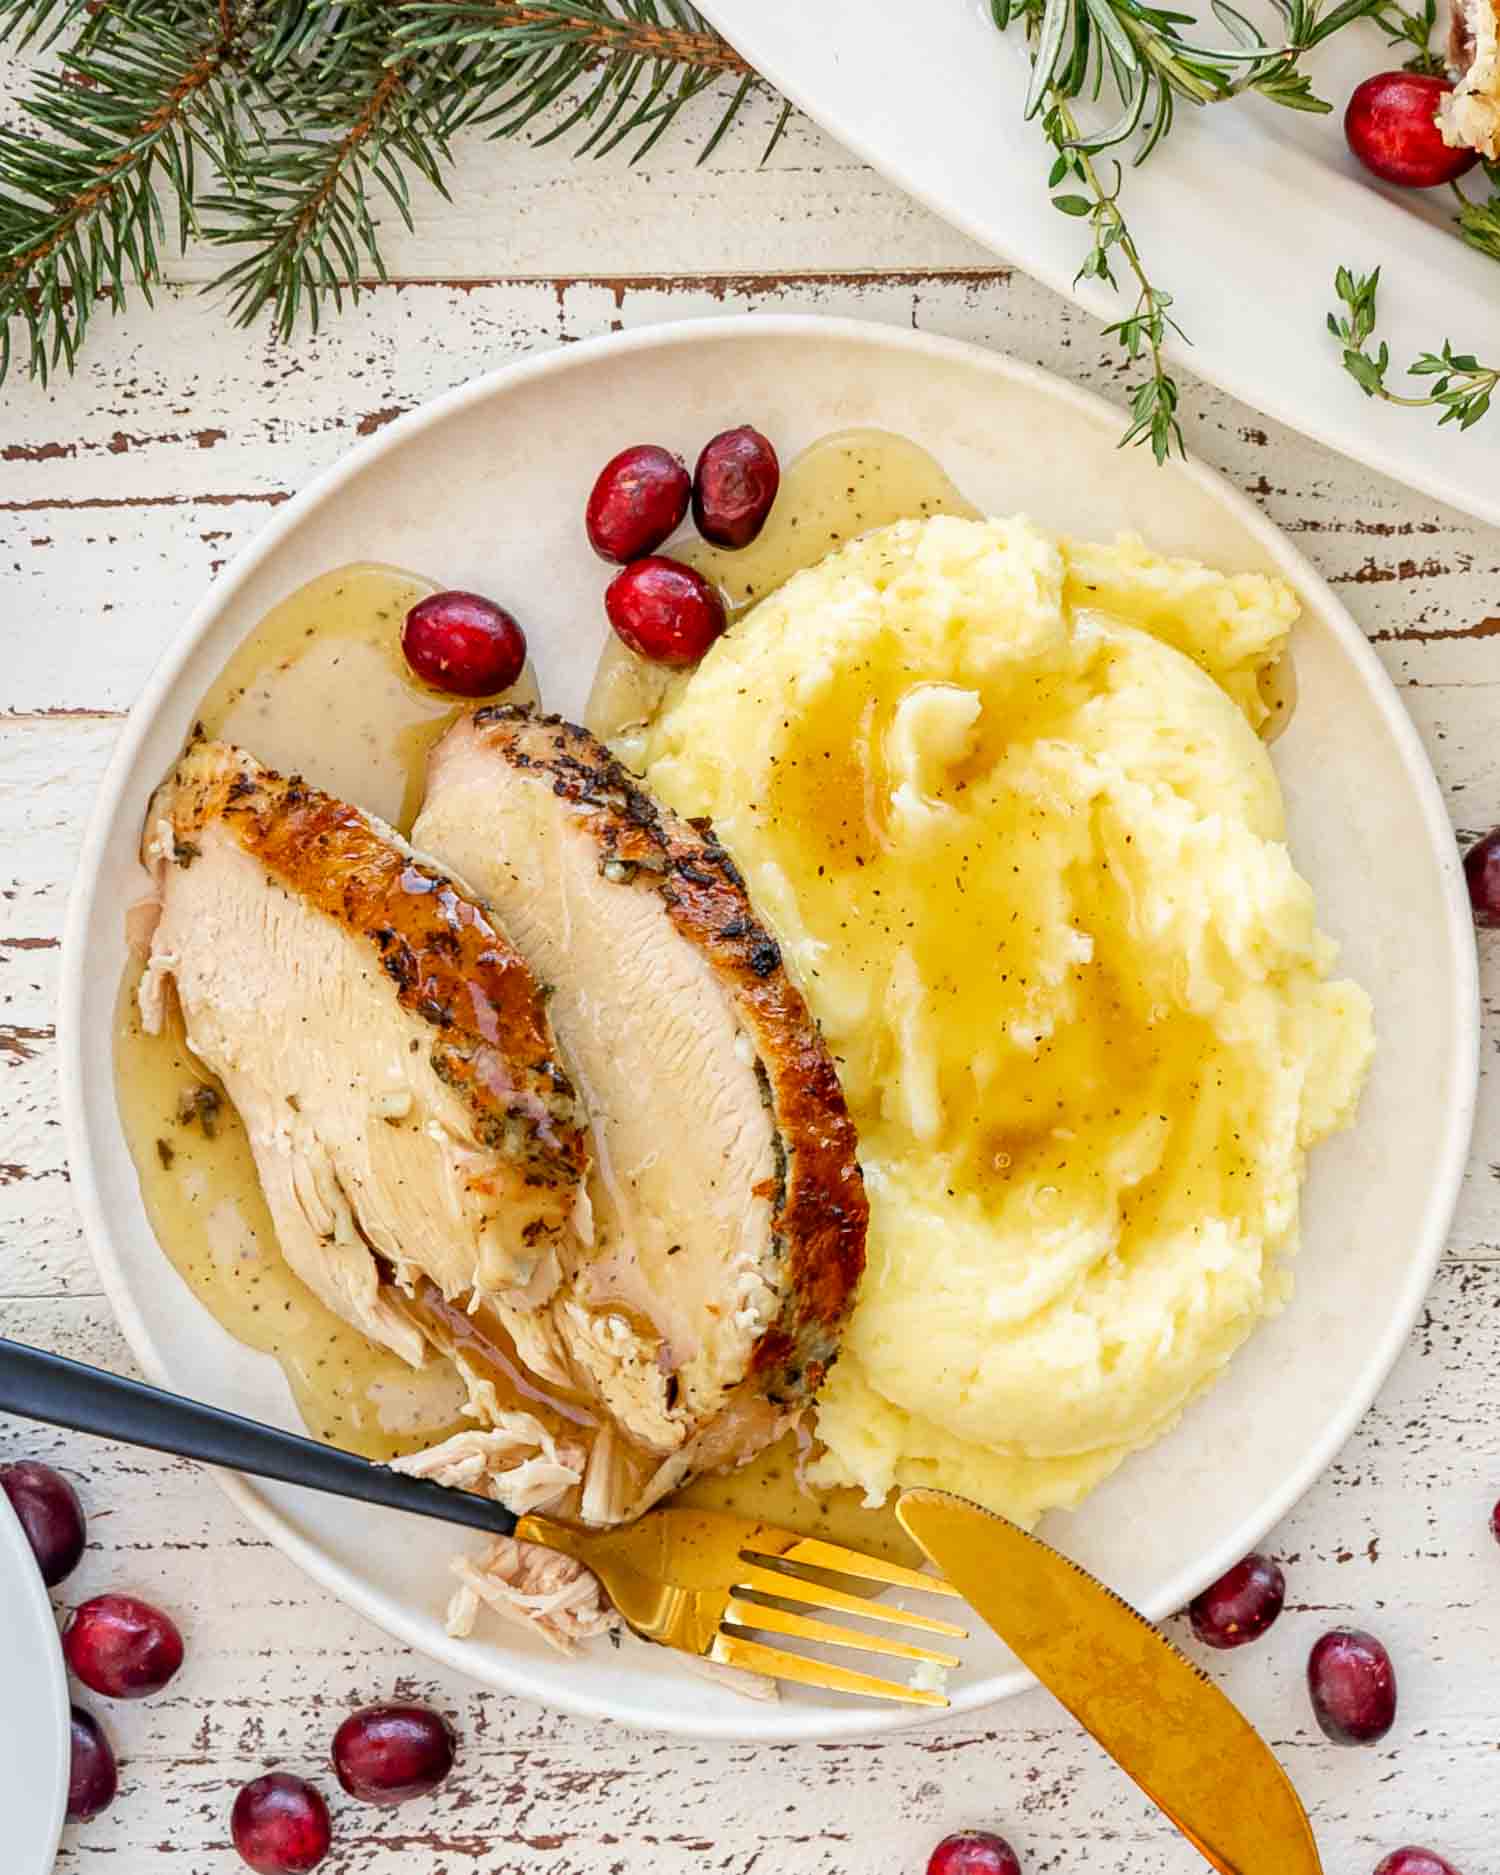 slow cooker turkey breast slices and creamy mashed potatoes topped with gravy, garnished with cranberries.